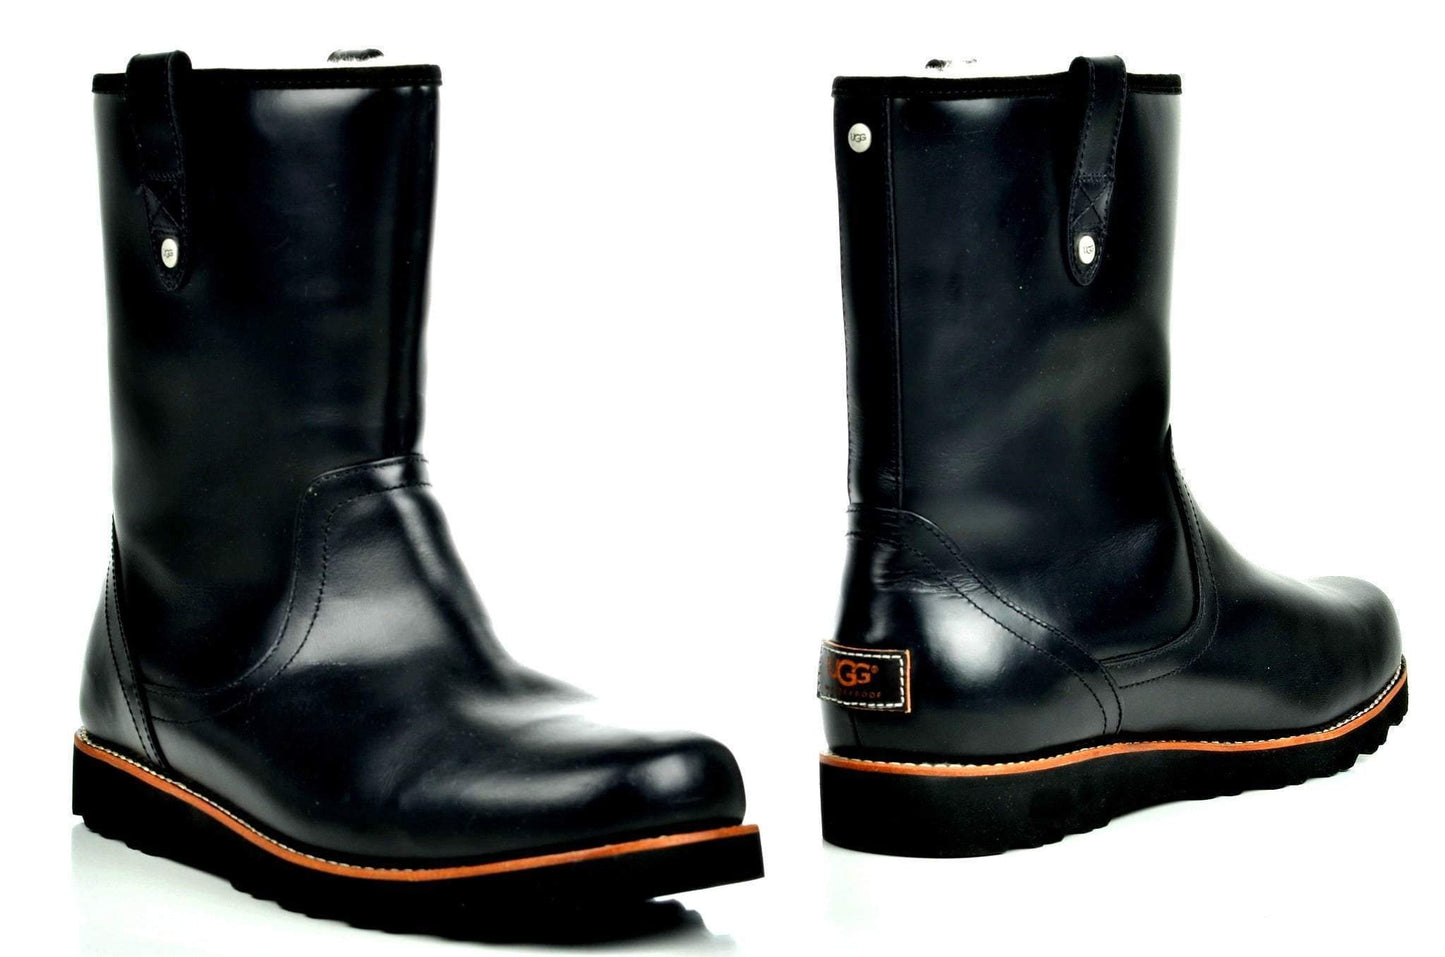 Bootland Boots 5 / Black Warm Grip Sole Boots 2 Colors